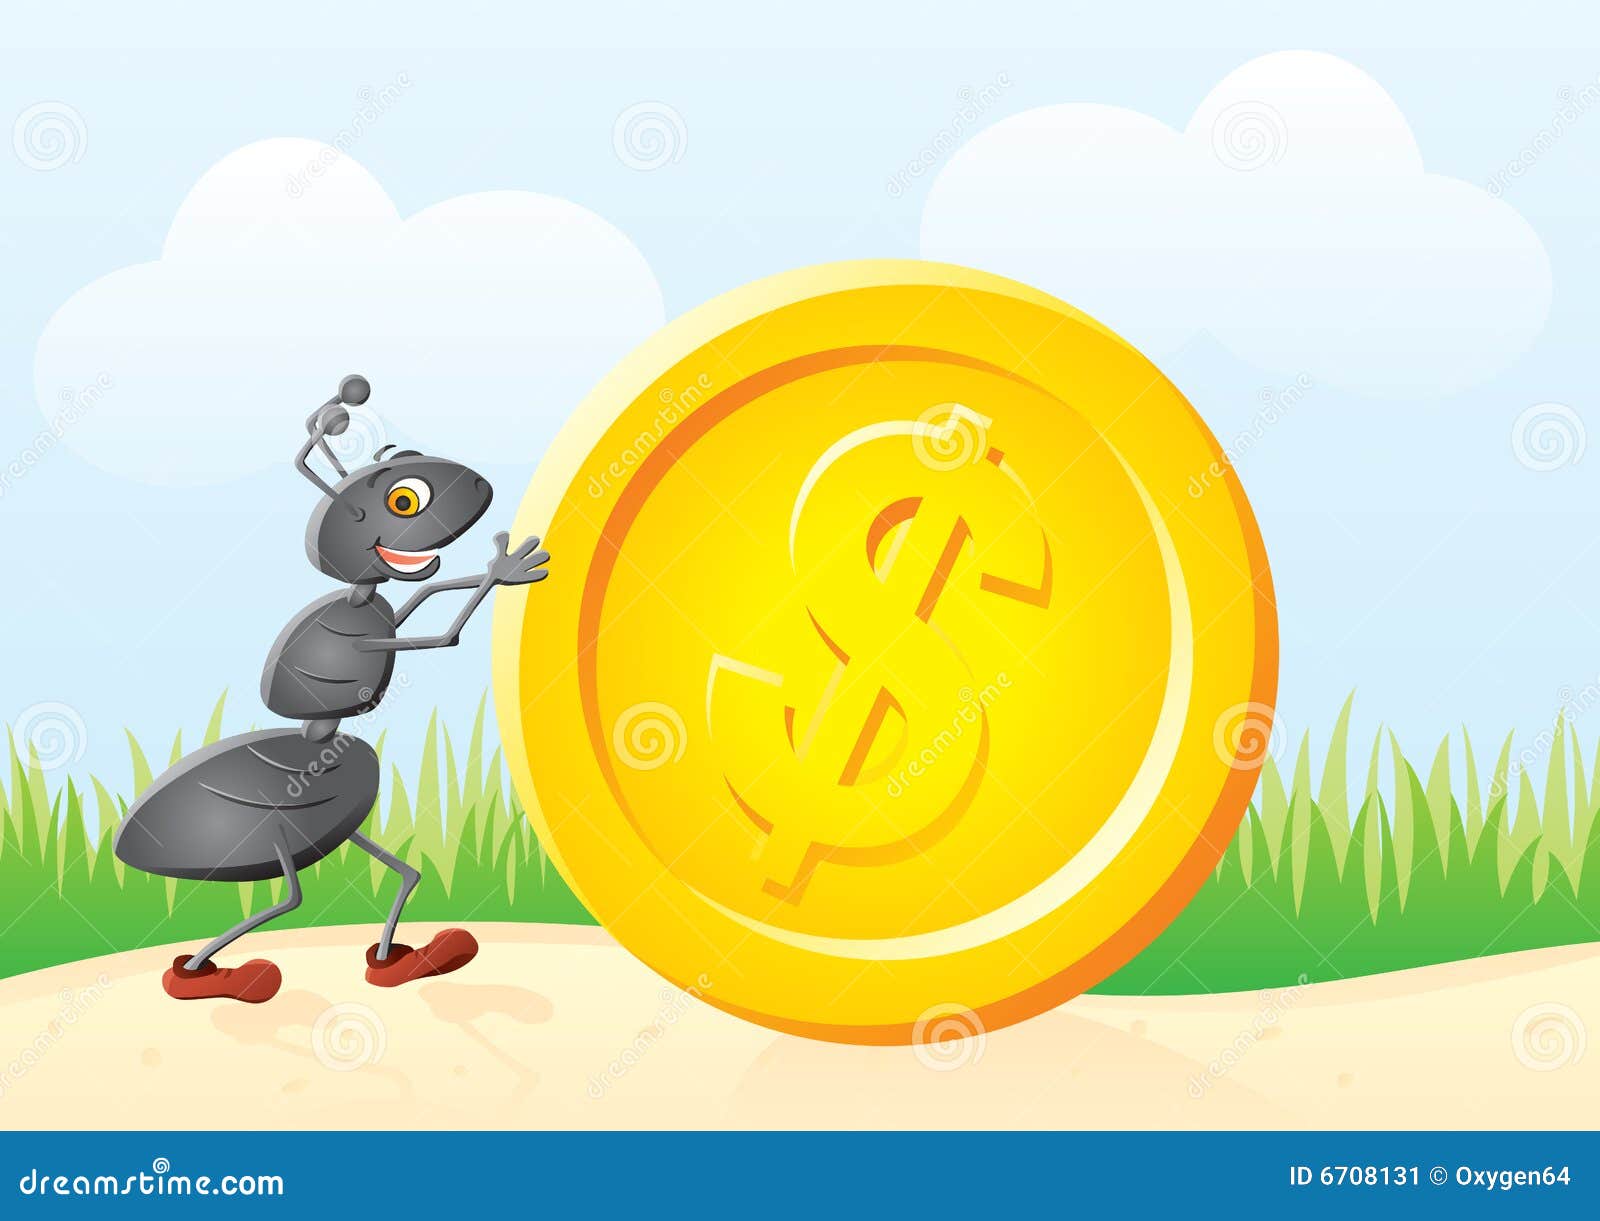 Ant and coin stock vector. Illustration of humor, currency ...